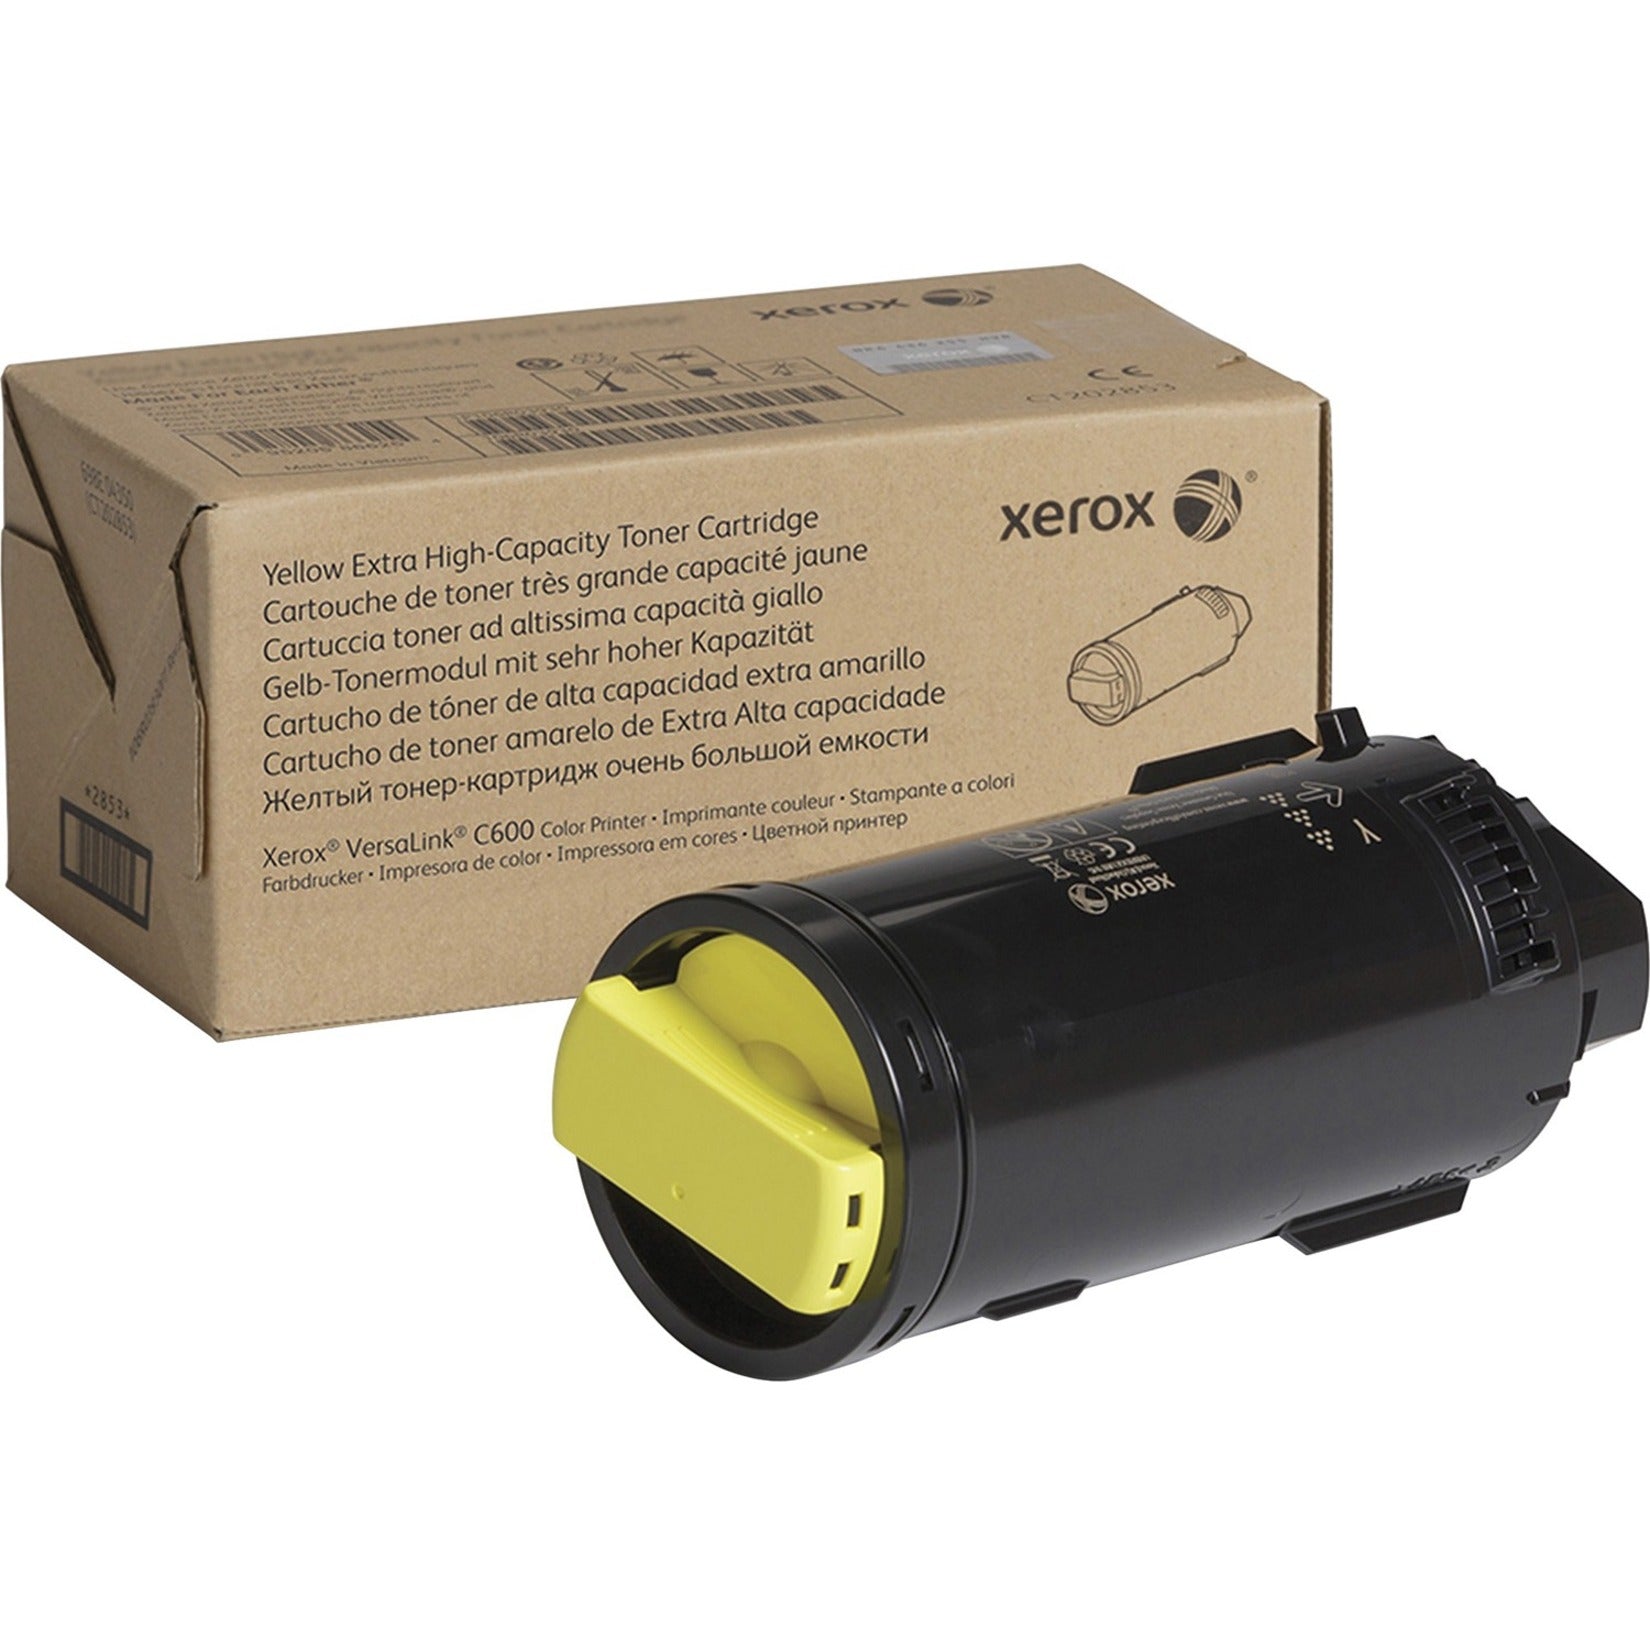 Xerox 106R04008 Toner Cartridge, Extra High Yield, Yellow, 16800 Pages